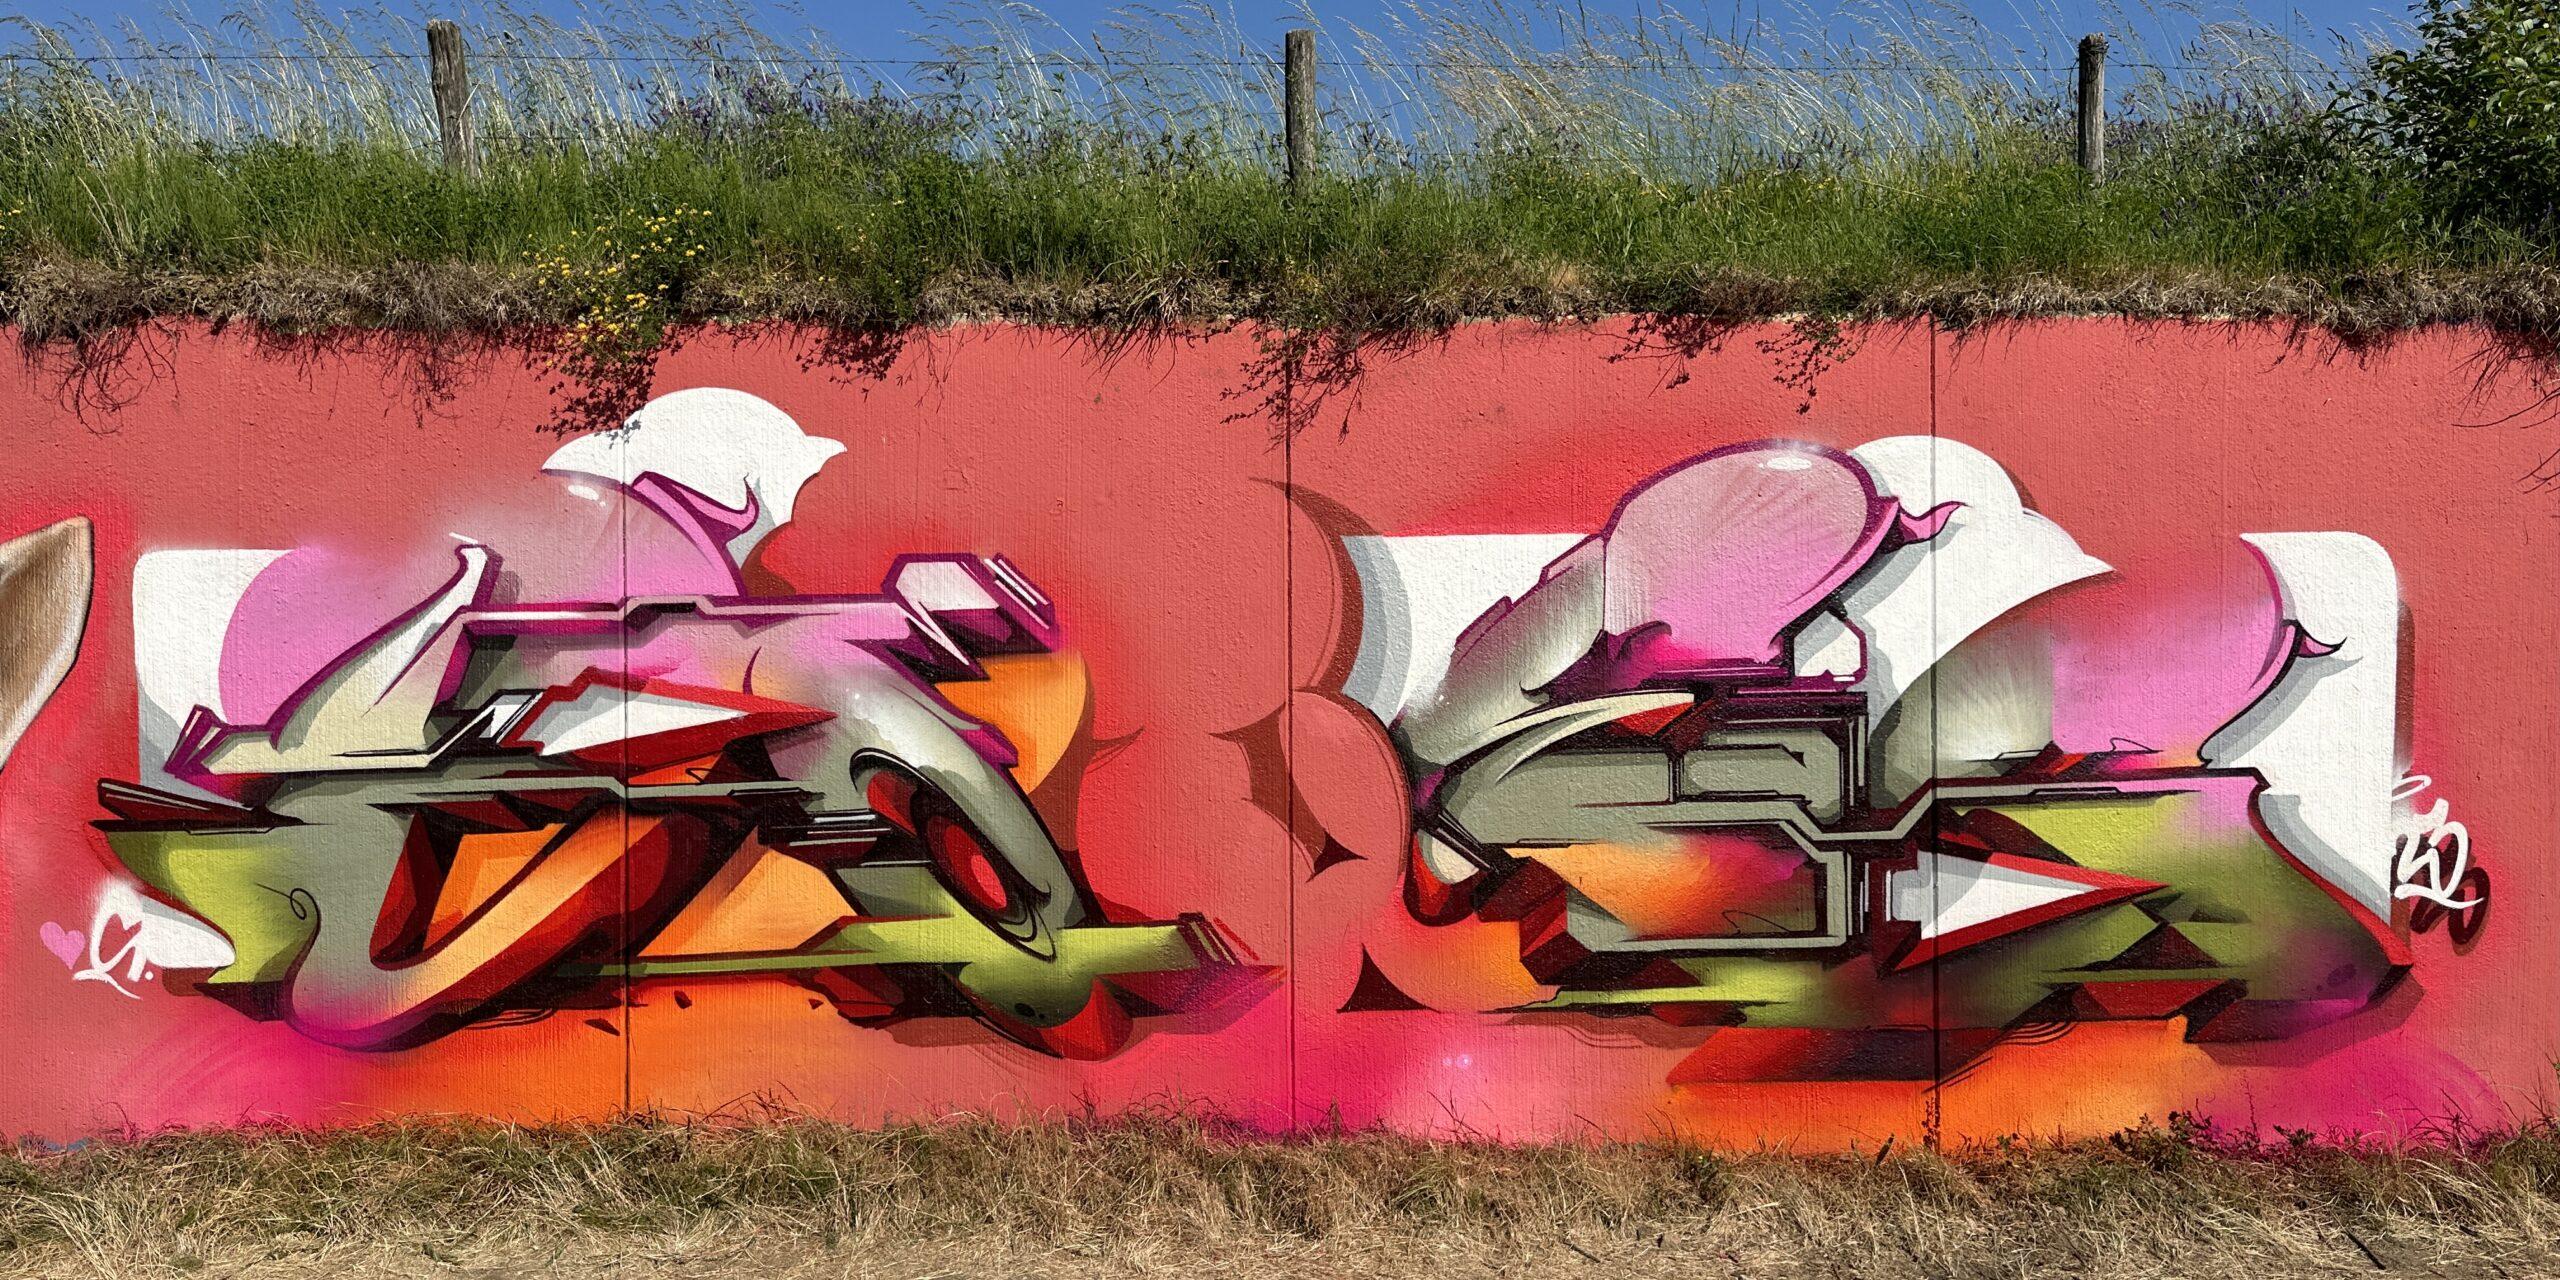 A work by Does - Geleen, the Netherlands_thumb